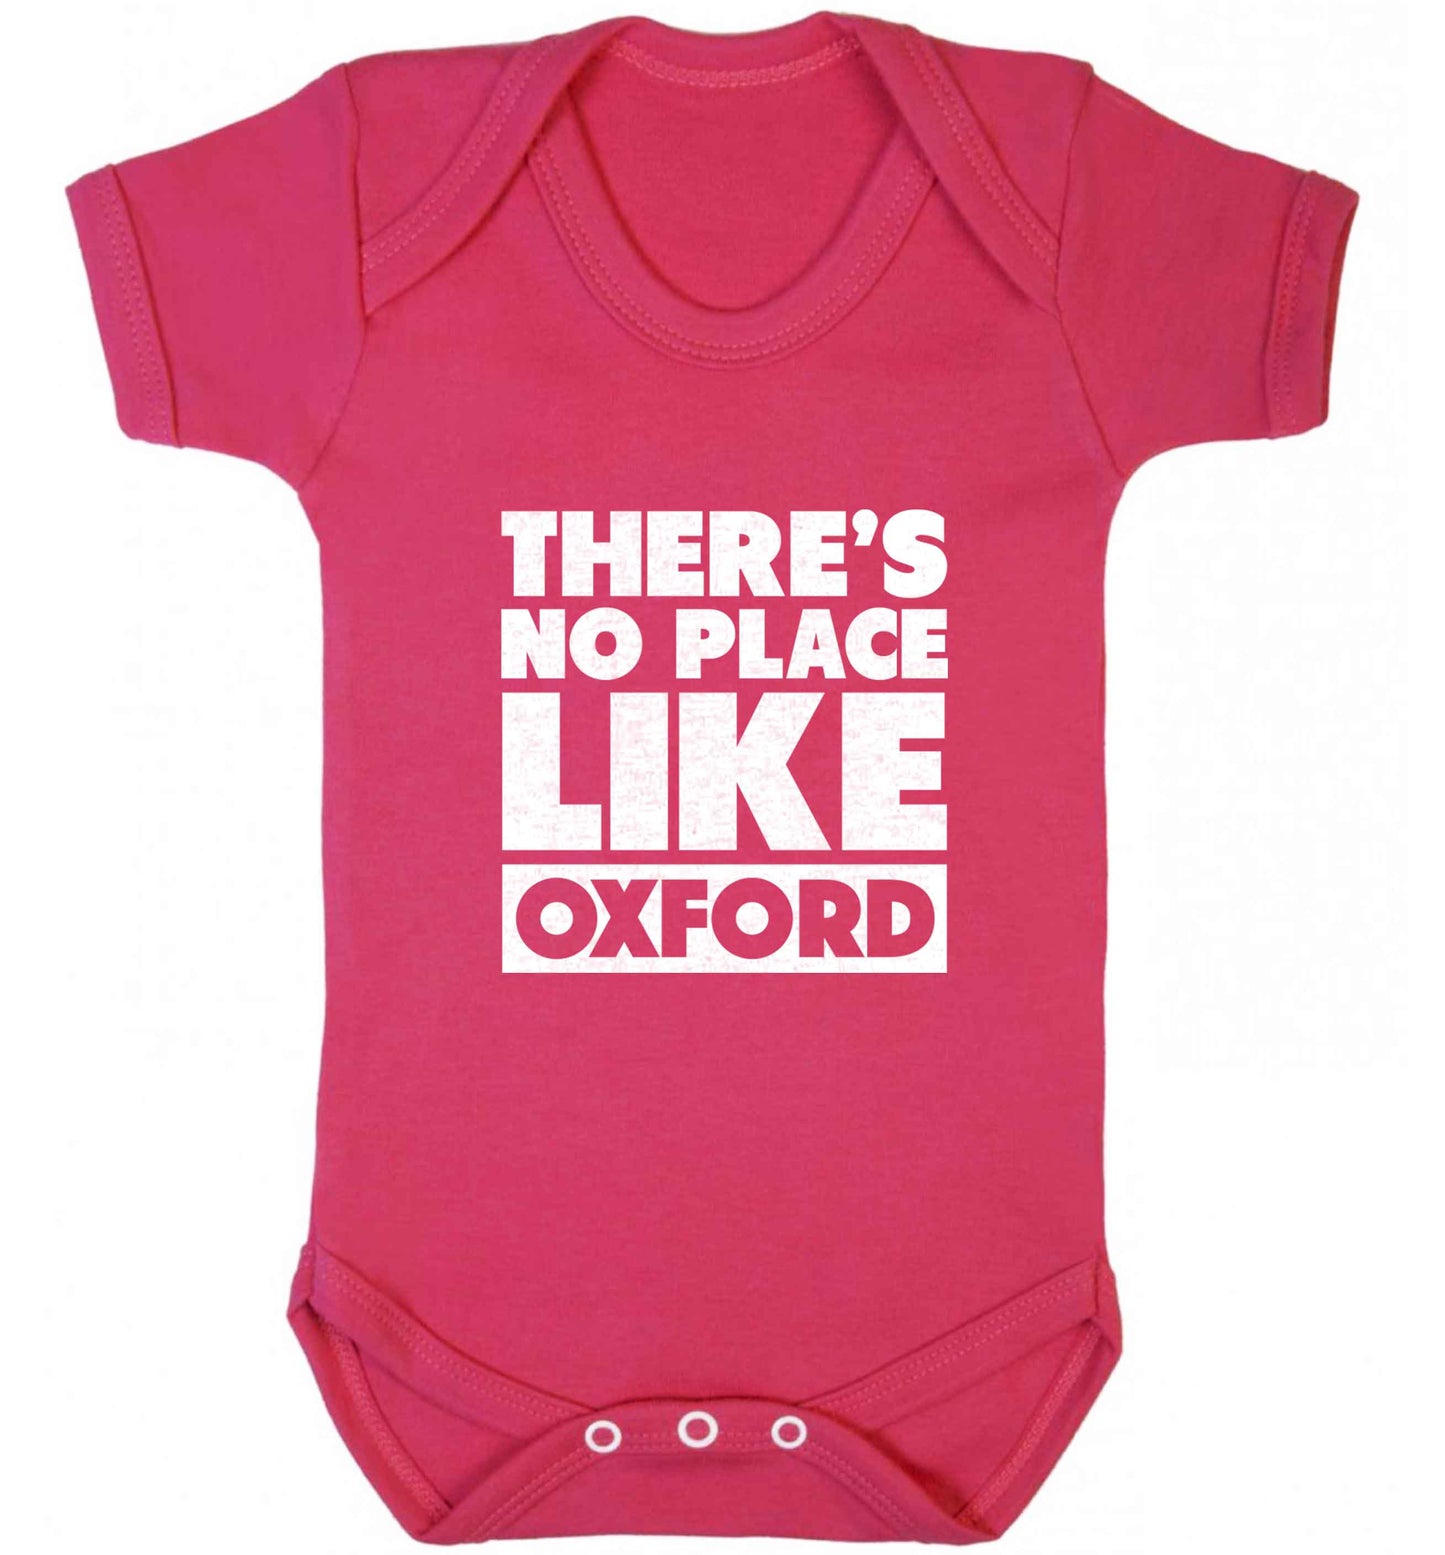 There's no place like Oxford baby vest dark pink 18-24 months